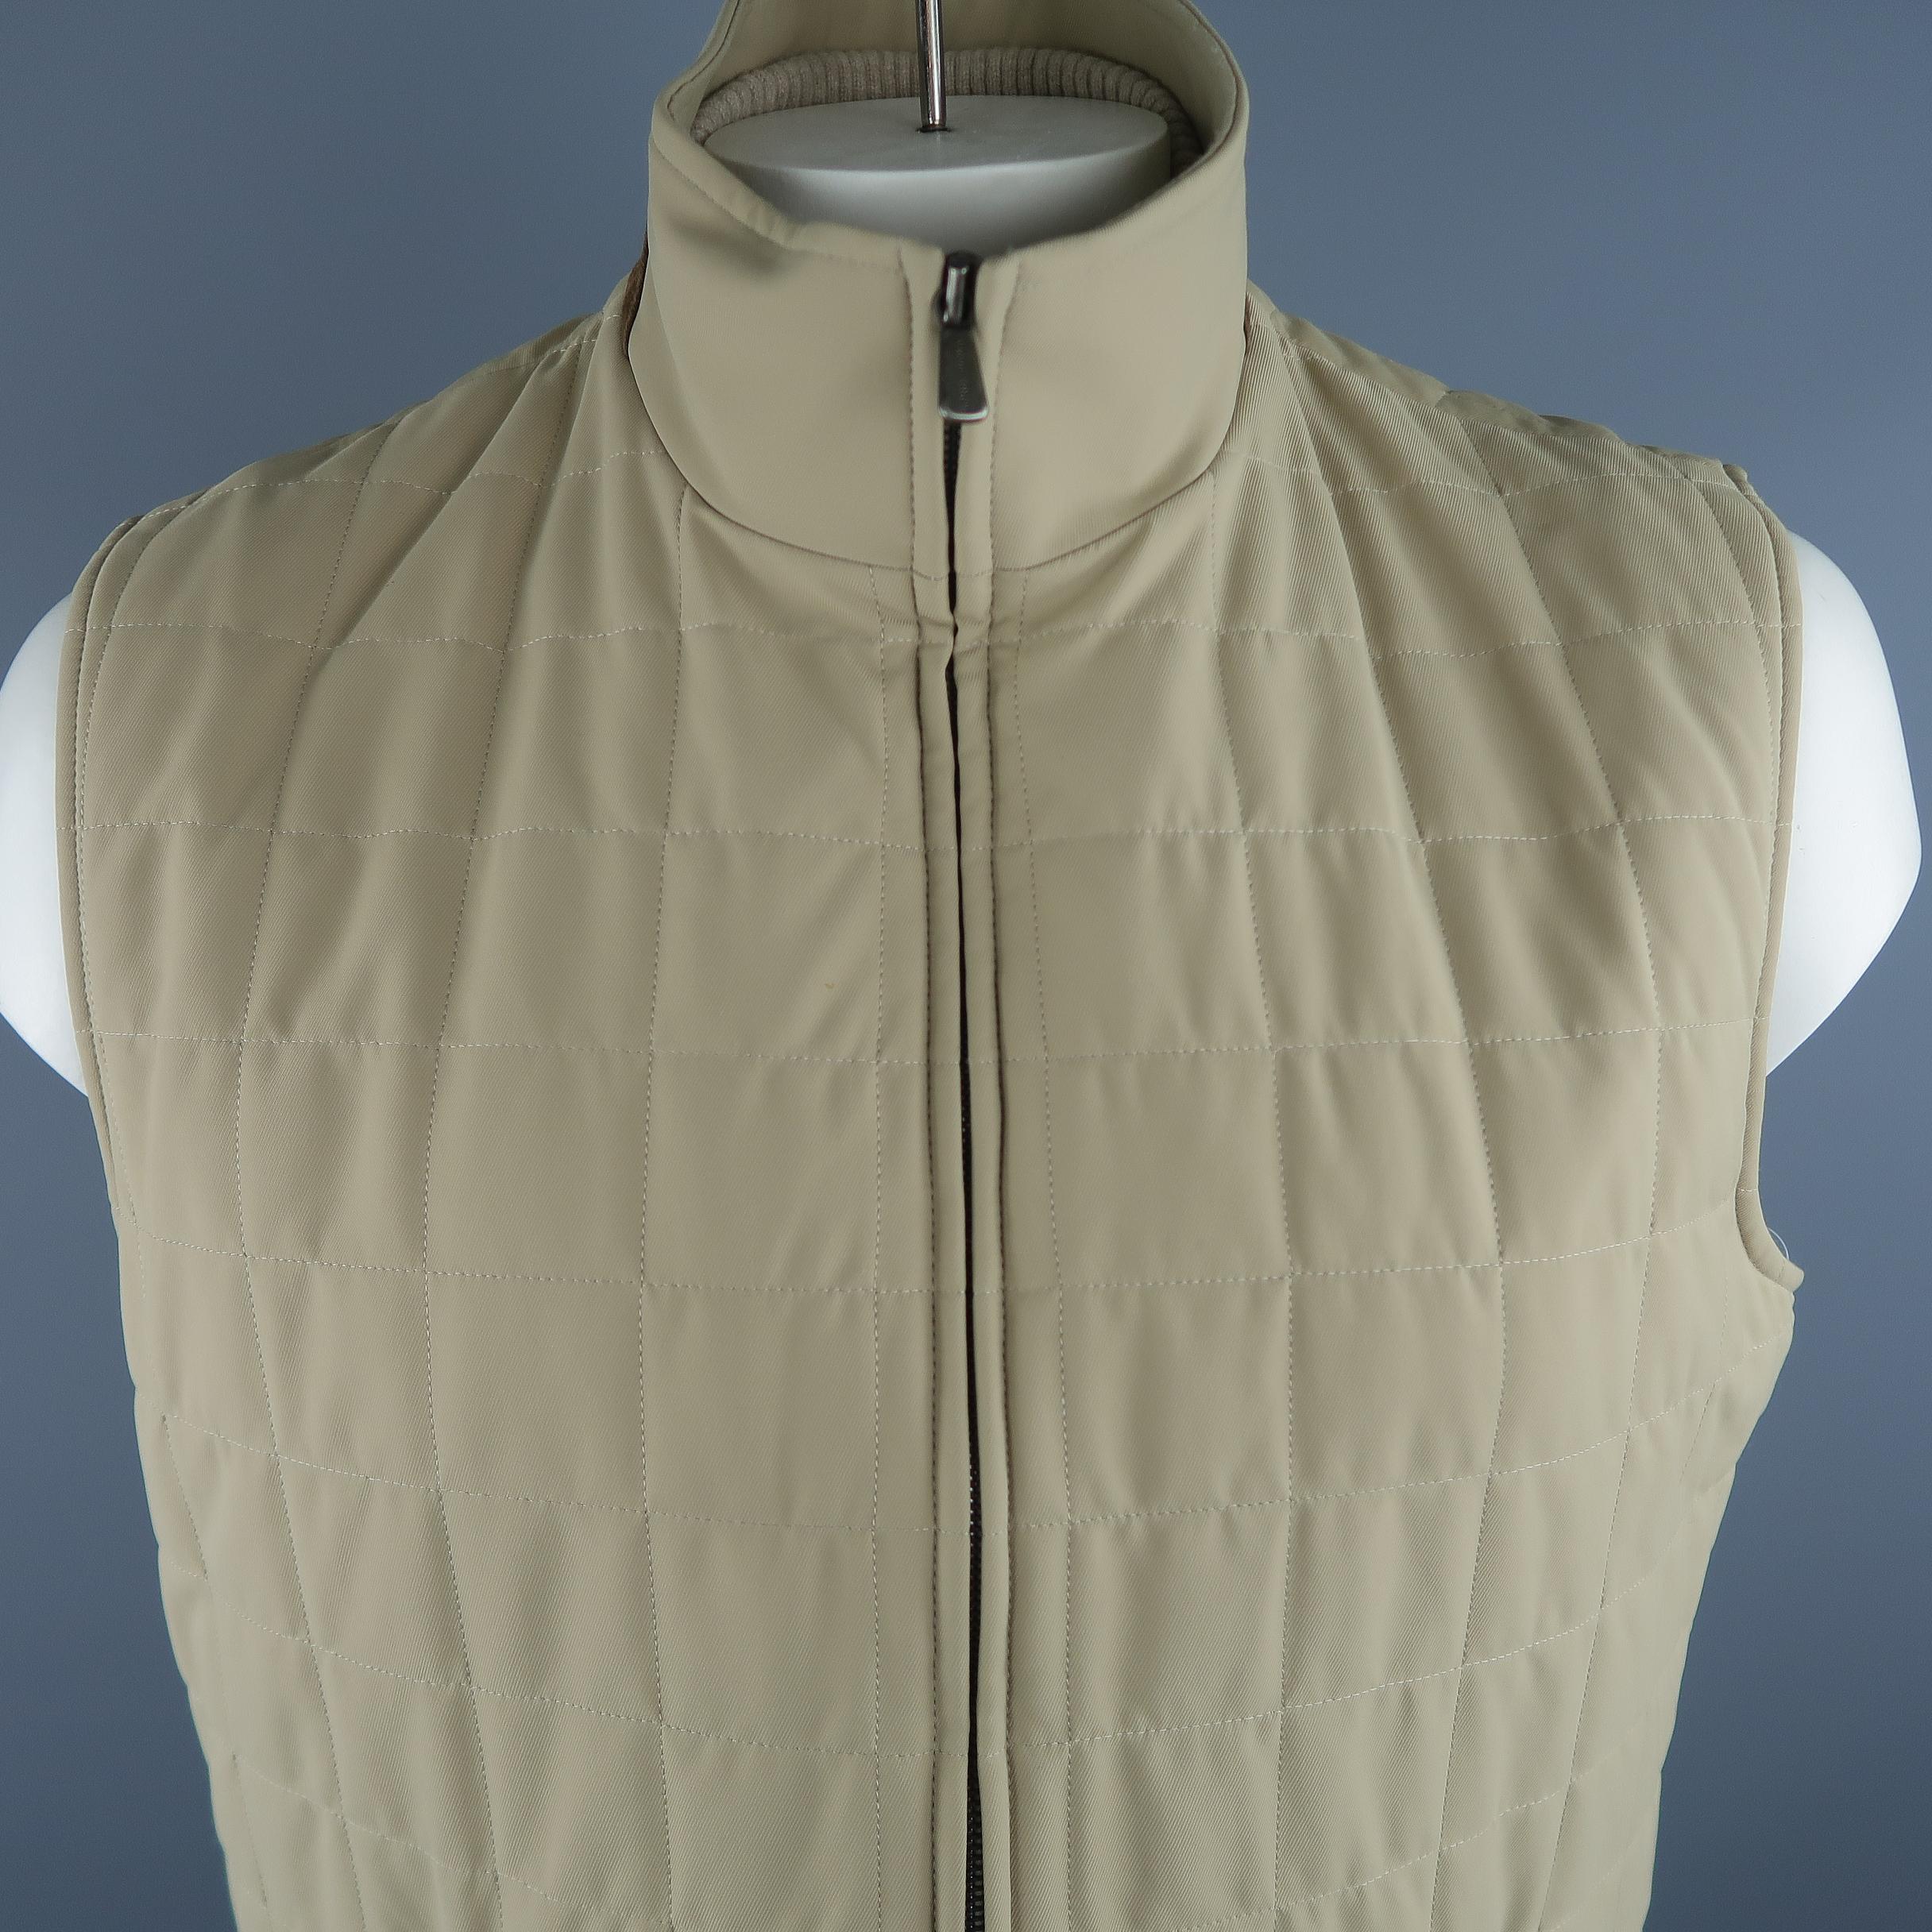 LORO PIANA vest comes in khaki quilted nylon material, suede trim on the collar, zip up and zip pockets. Made in Italy.
 
Excellent  Pre-Owned Condition.
Marked: XL IT
 
Measurements:
 
Shoulder: 18 in.
Chest: 48 in.
Length: 27.5 in.